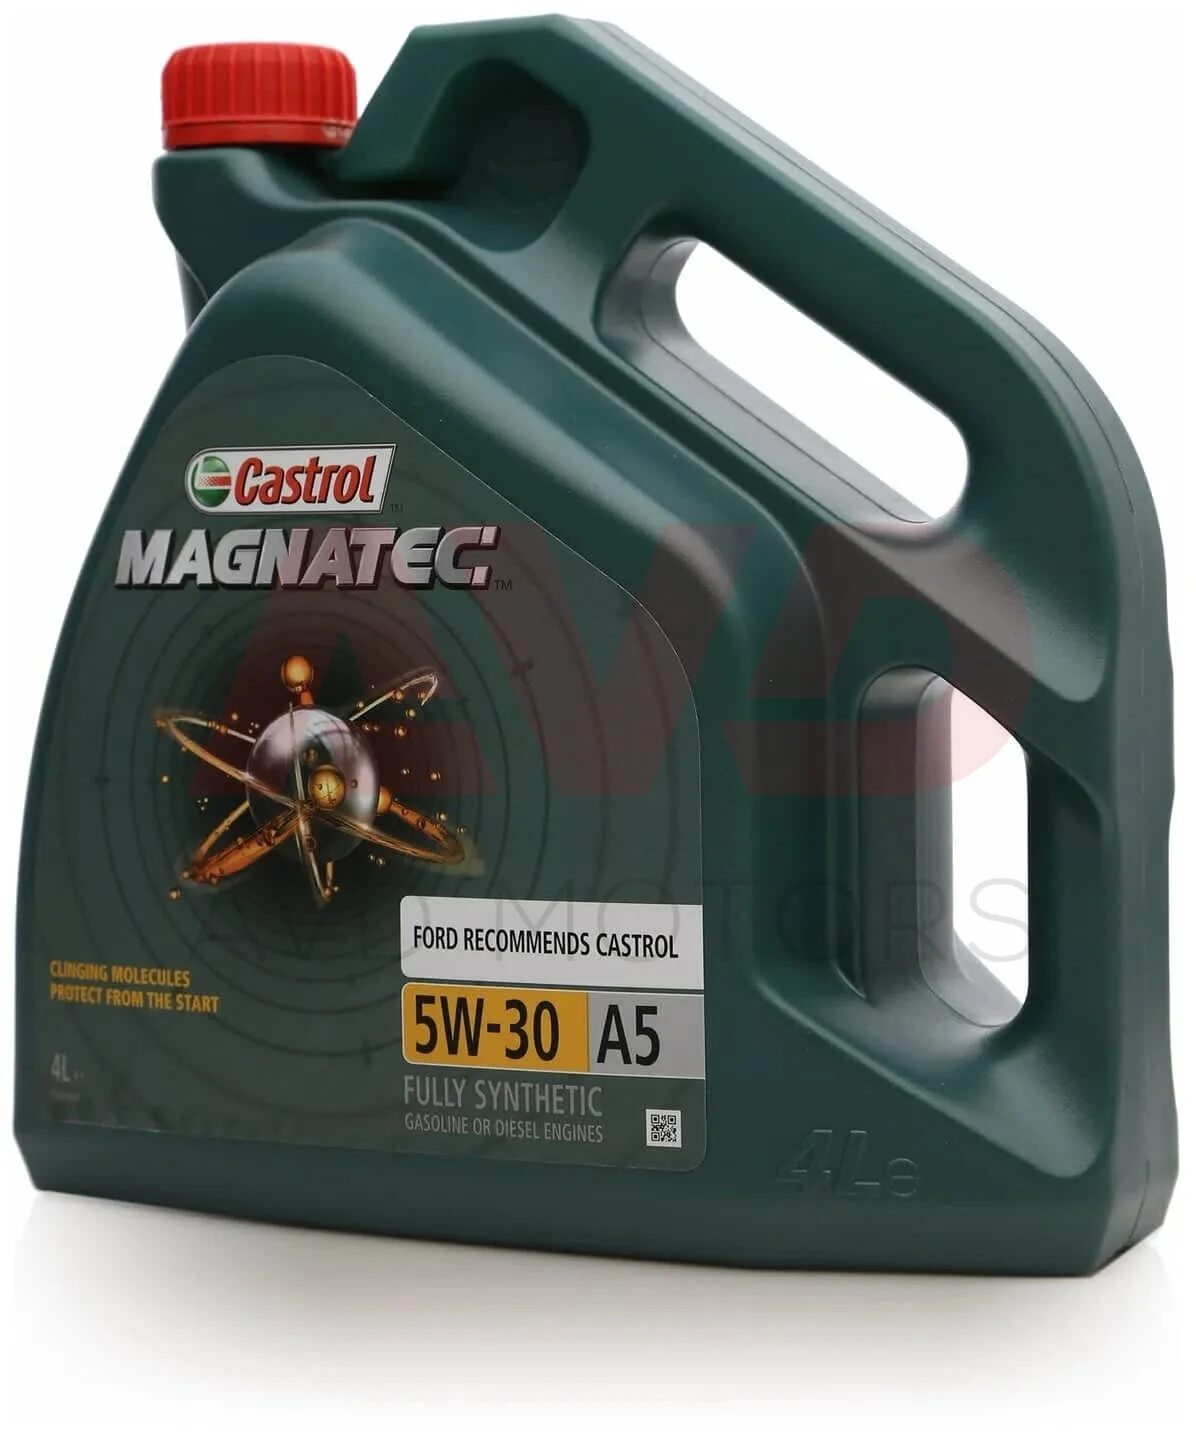 Castrol Magnatec 5w-30 AP 4 Л. Magnatec AP 5w30 (5 л). Castrol Magnatec AP 5w-30, 1л. Castrol 5w30 Magnatec 4л Ford. Масло кастрол магнатек 5w40